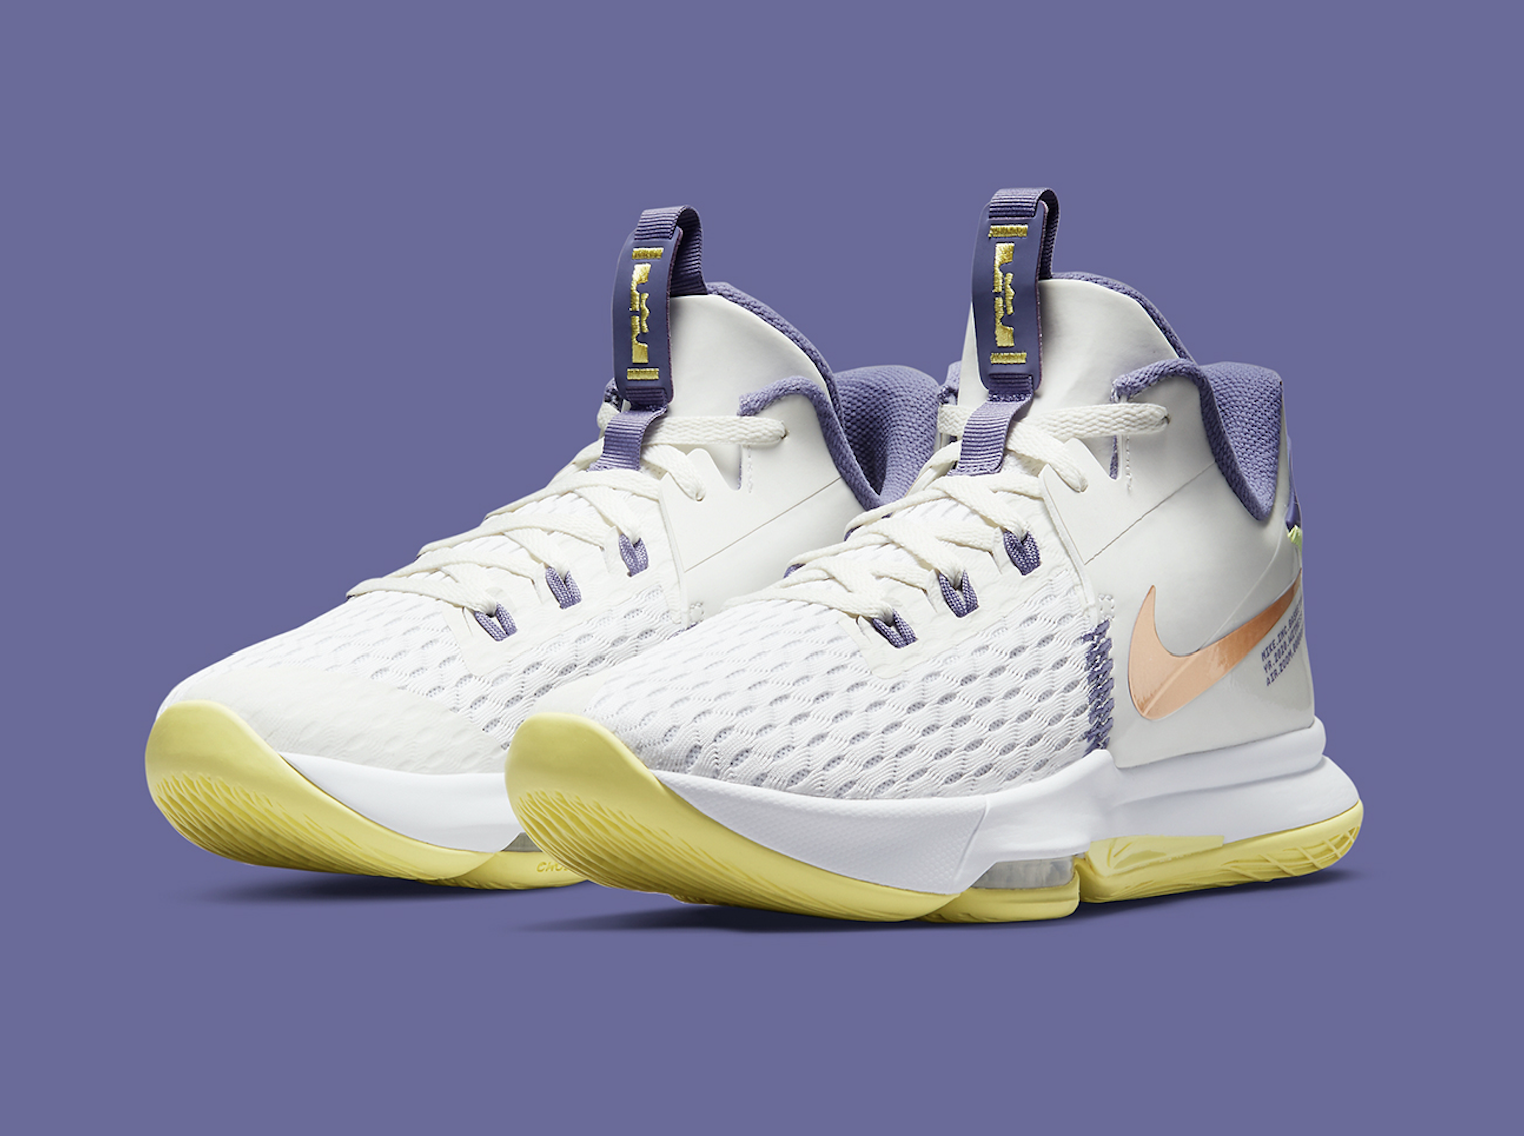 The Nike LeBron Witness 5 Lenses The Lakers Colors Through A Pastel Filter